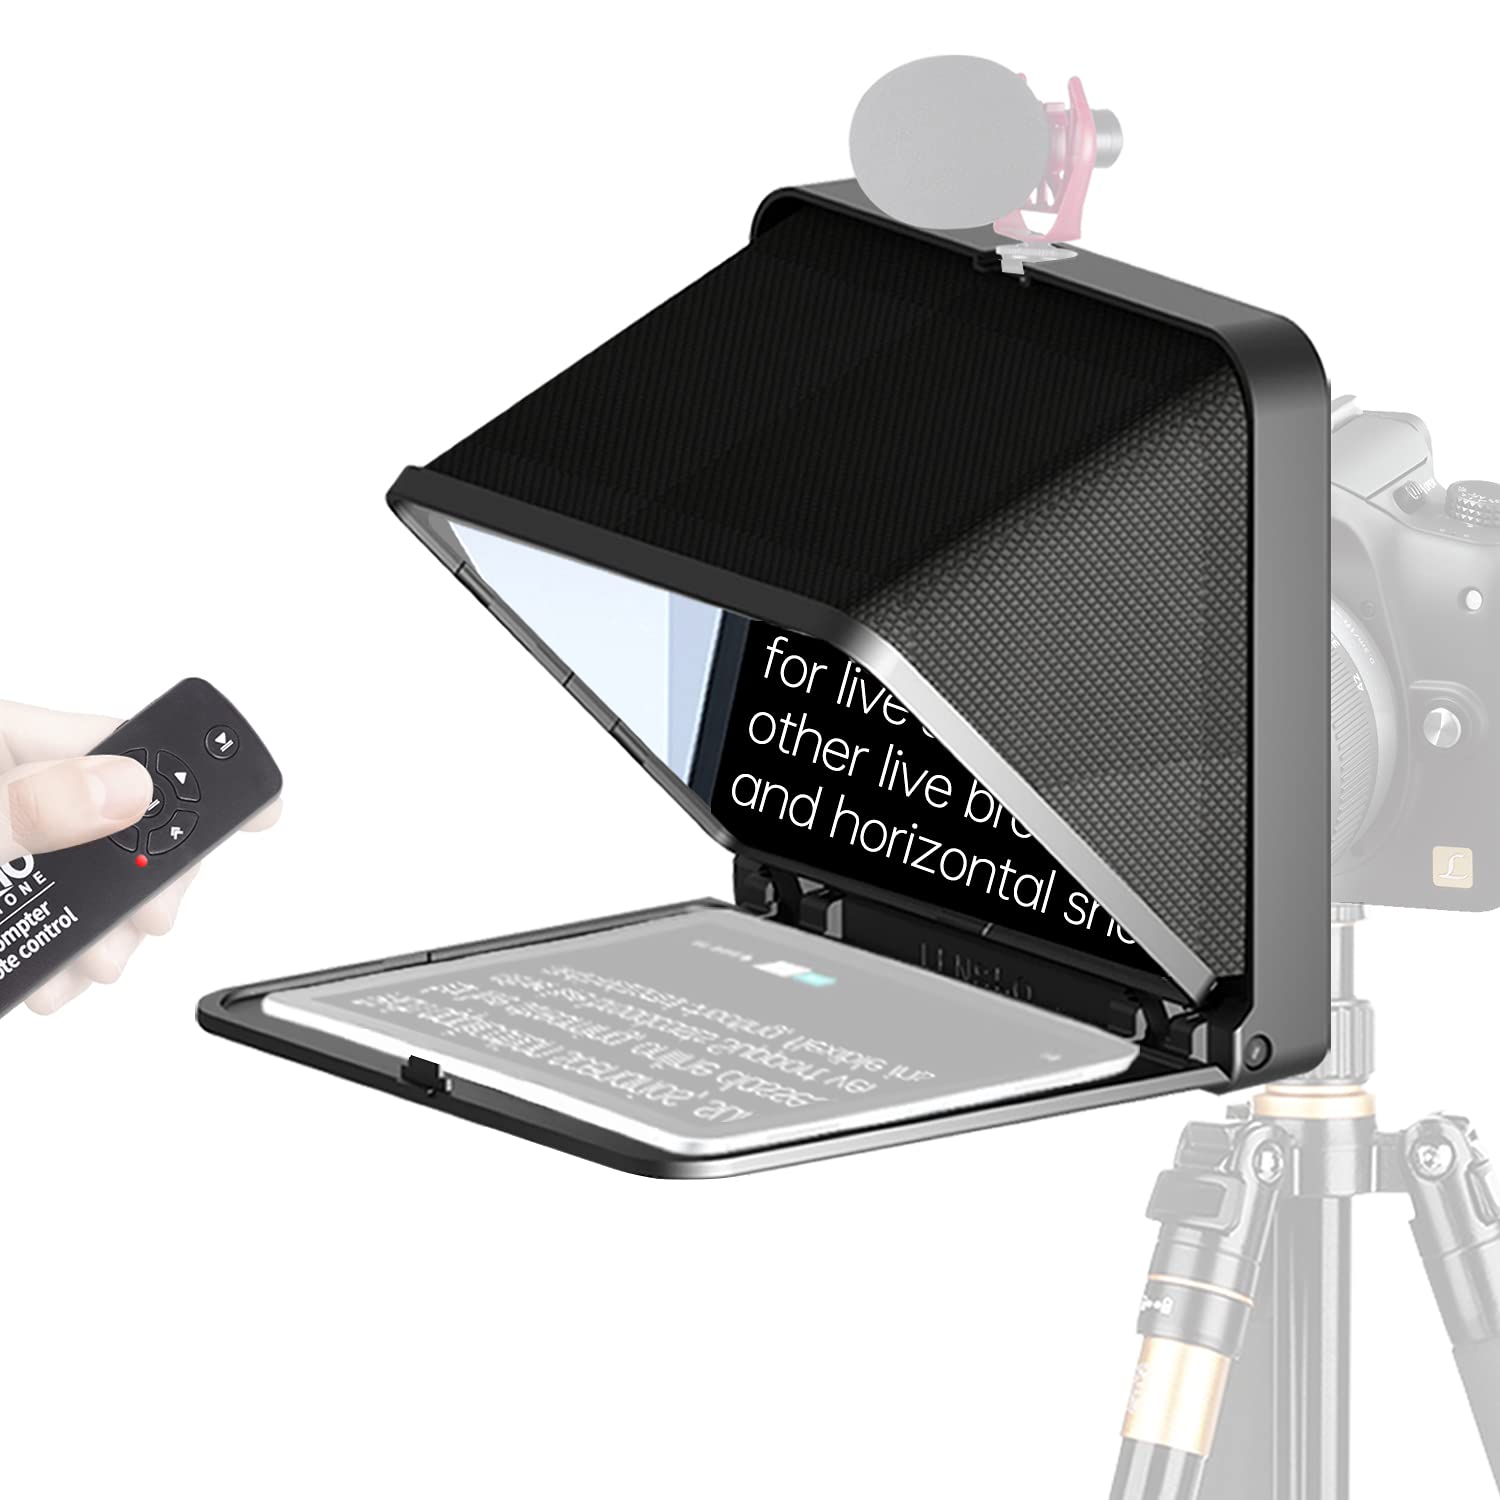 LENSGO TC7 8” Teleprompter for iPad Tablet Smartphone DSLR Camera, APP Compatible with iOS & Android System for Online Teaching Vlog Live Streaming...